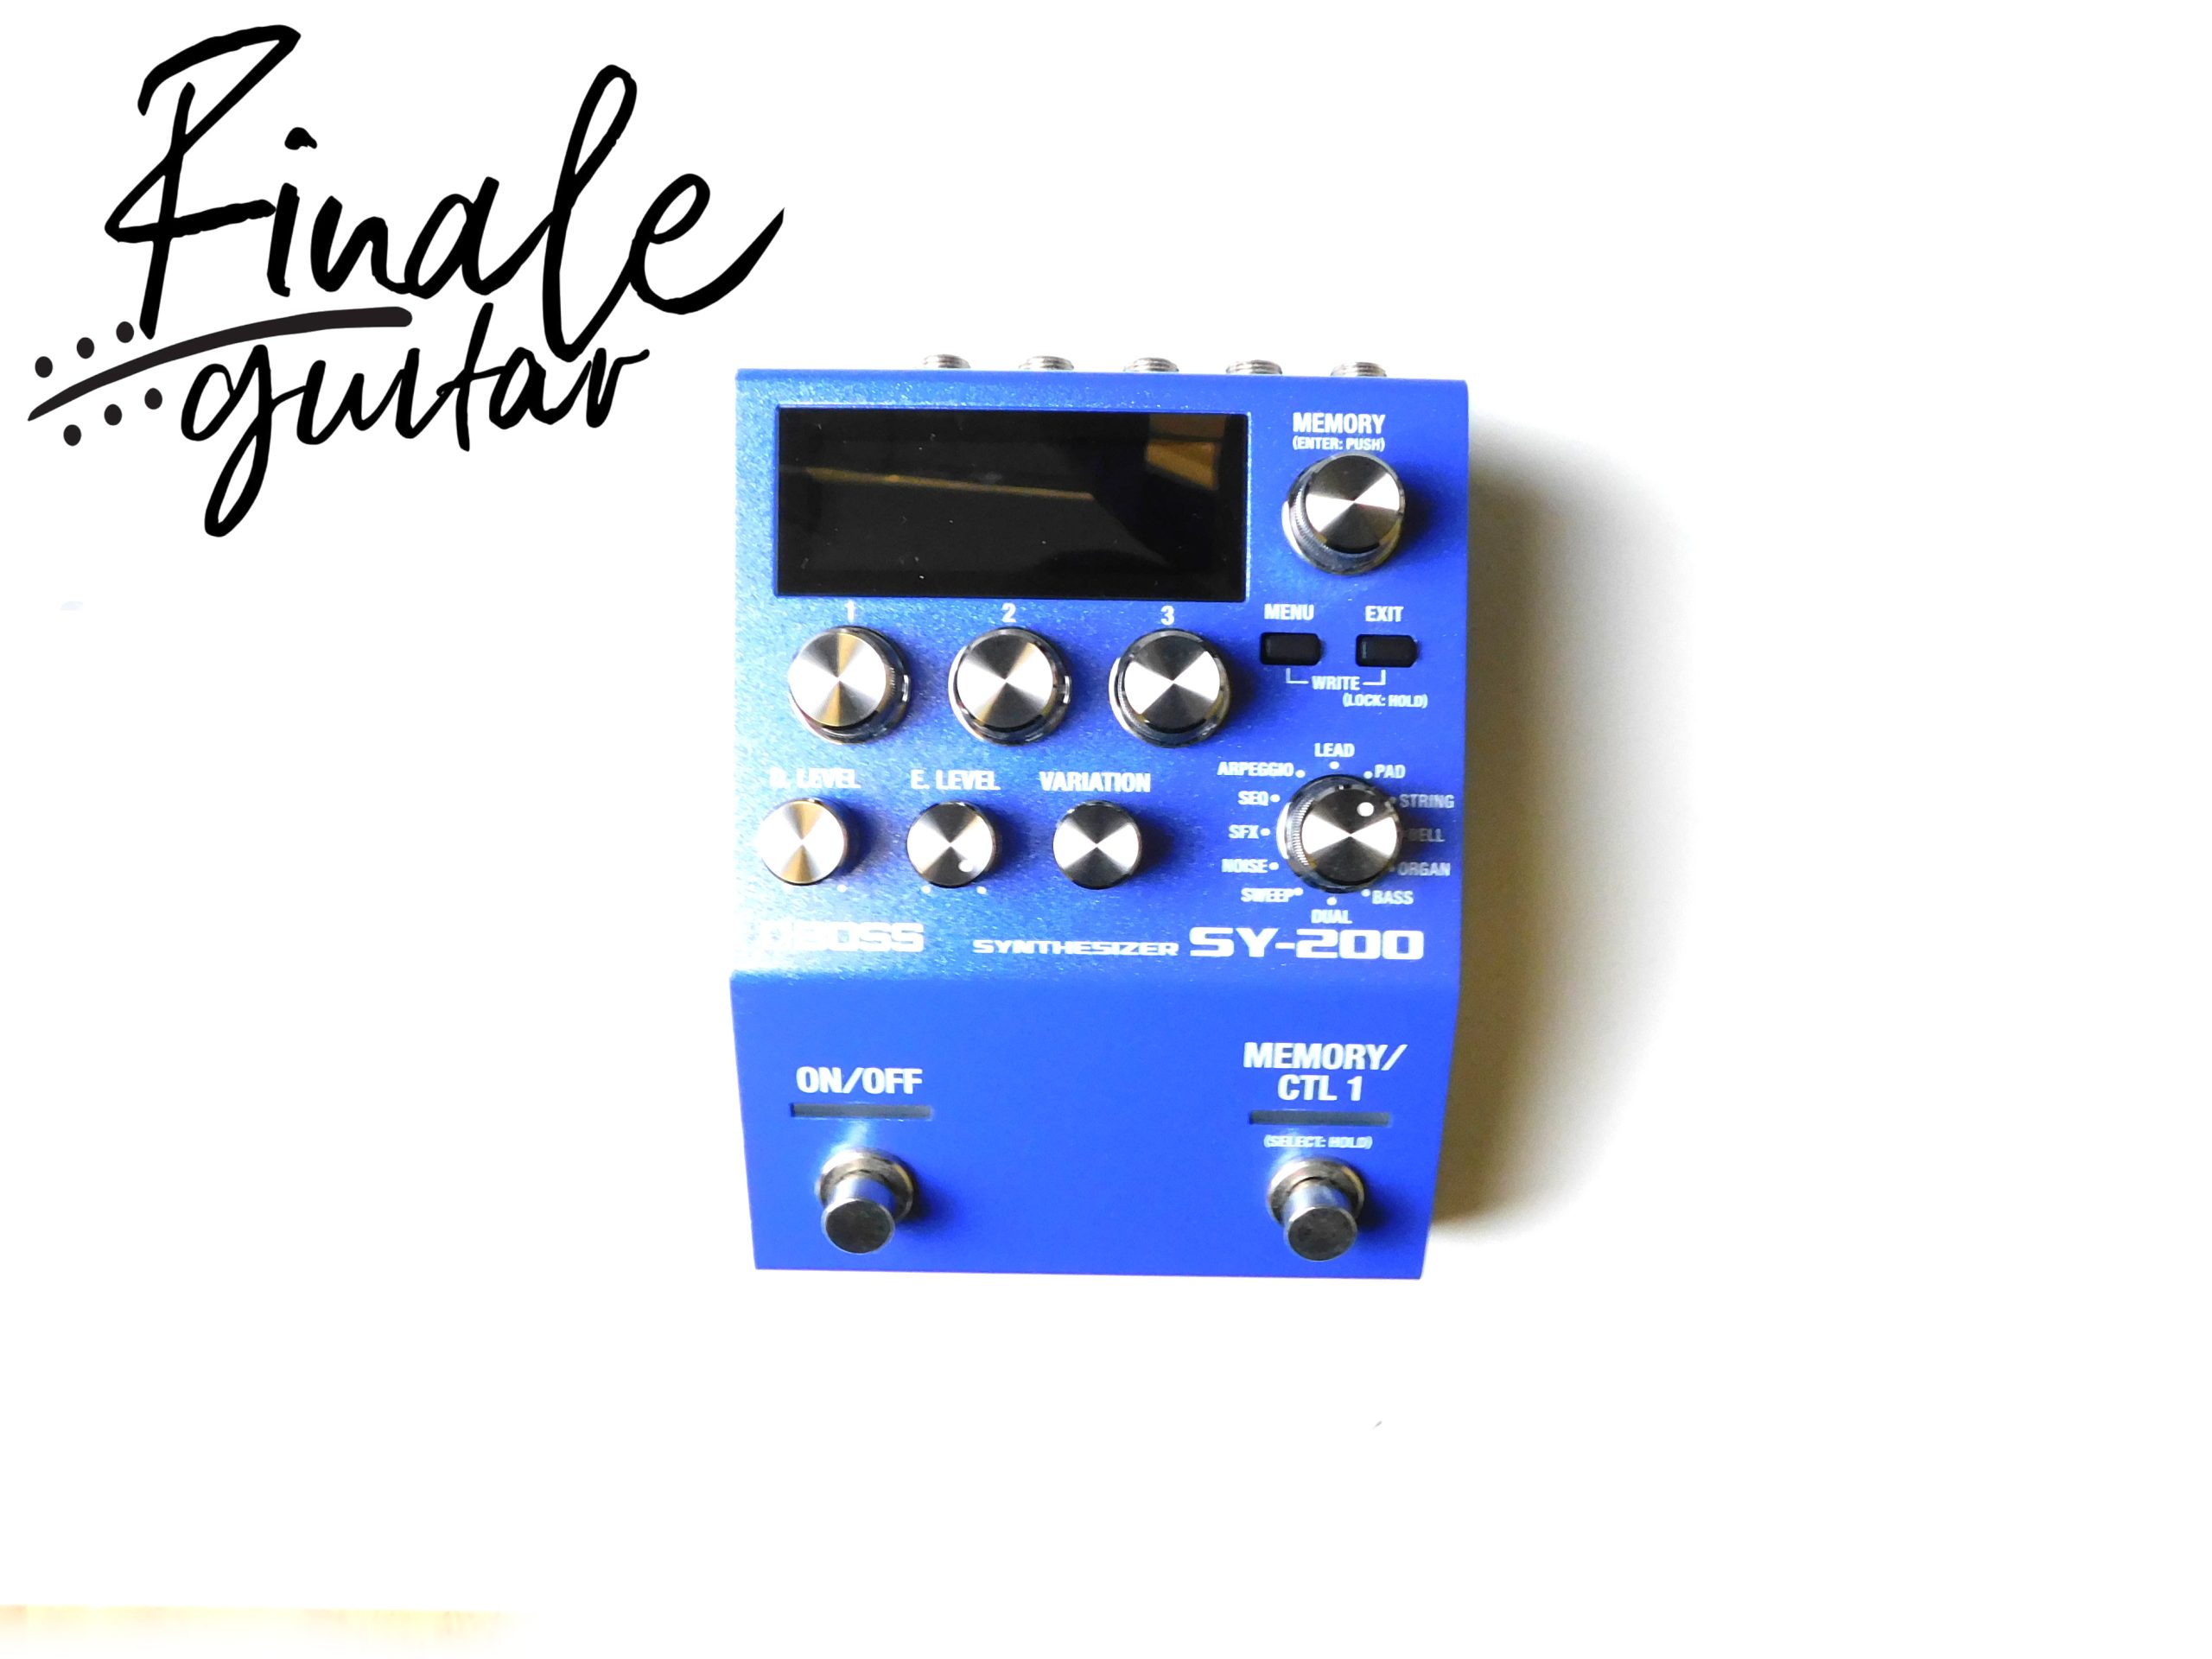 Boss SY-200 Synth pedal for sale in our Sheffield guitar shop, Finale Guitar